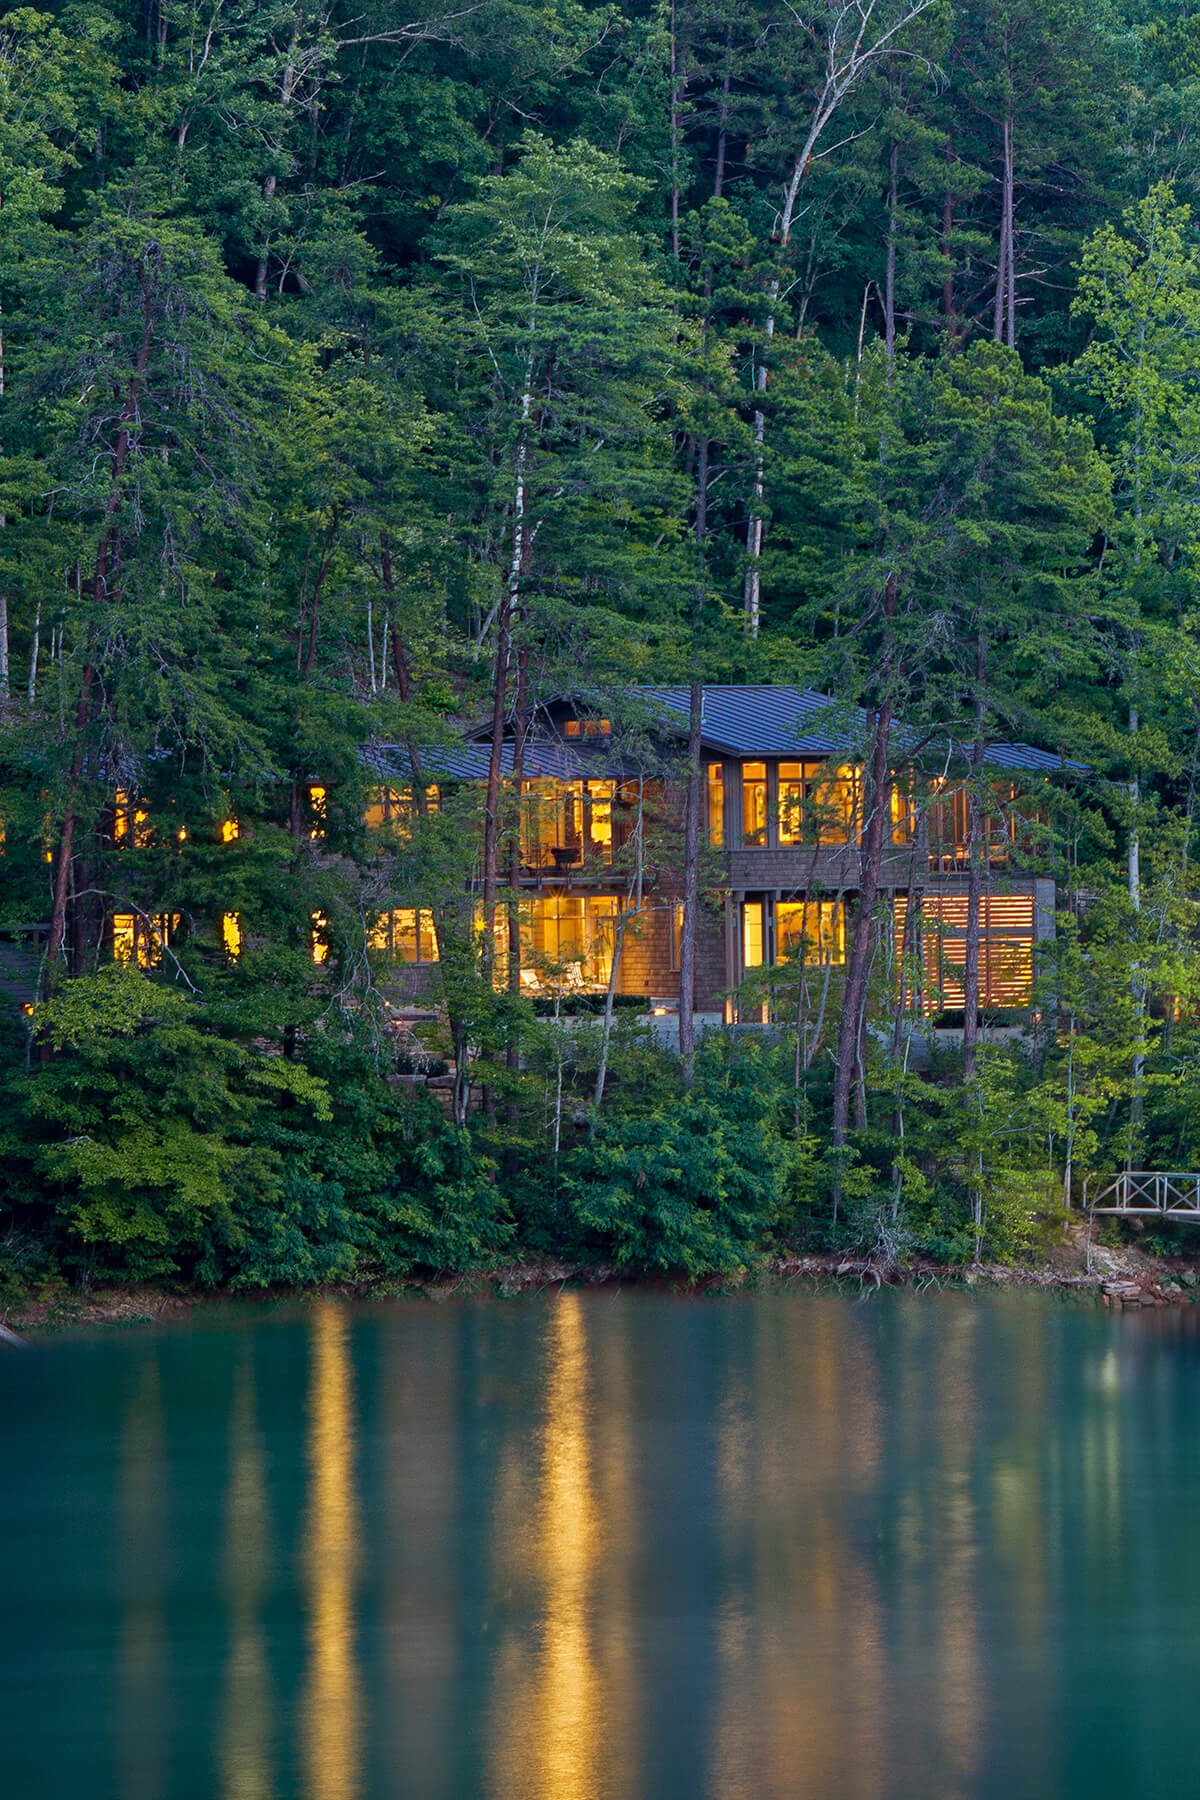 Fontana Lake House modern architectural residential design project